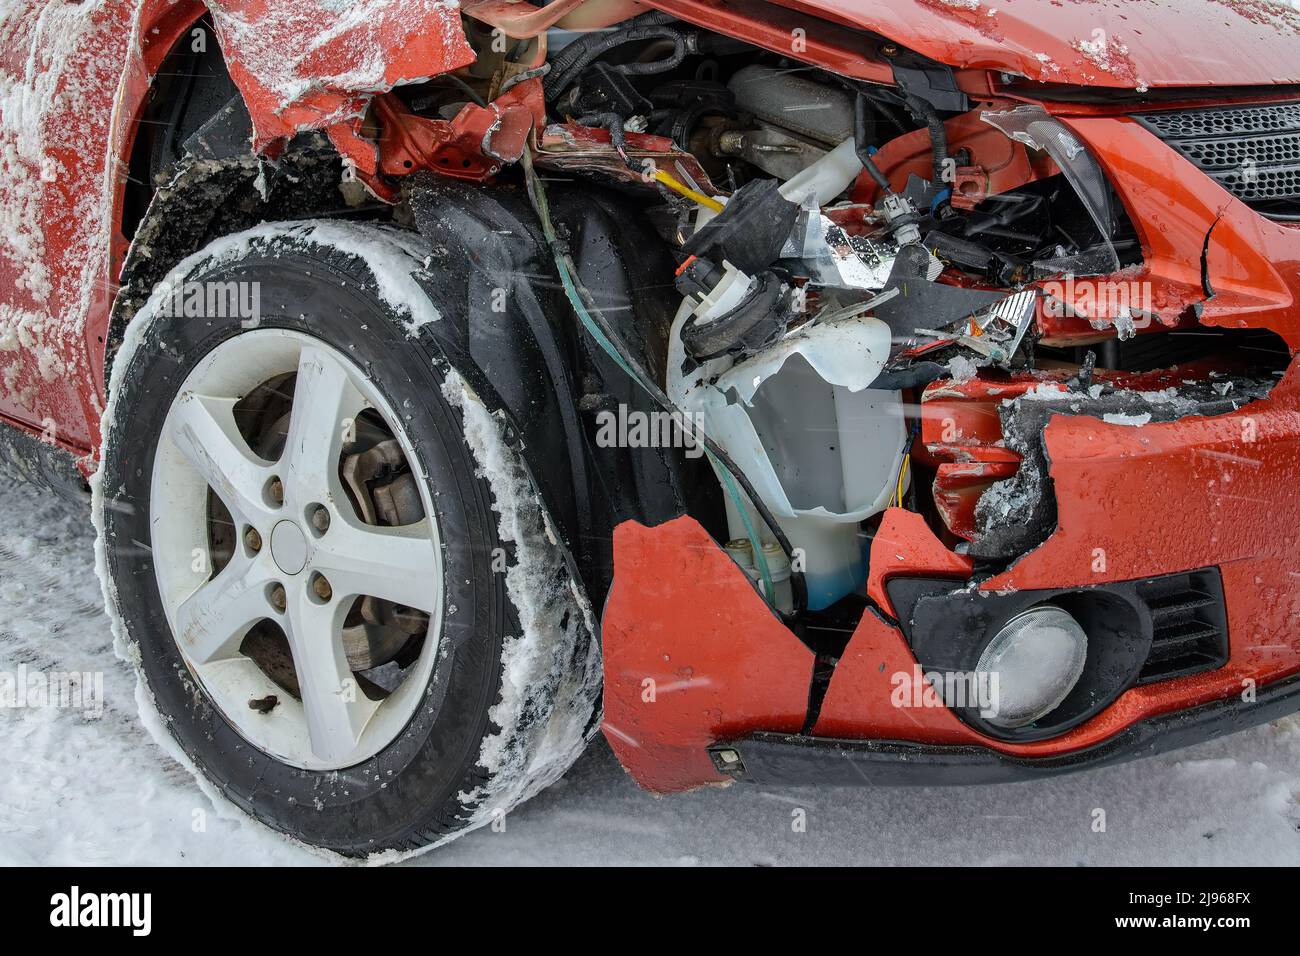 Front corner of an unidentified smashed car. Most of the fender is missing. Broken plastic and metal visible in the hole. Snow on ground and tire. Stock Photo